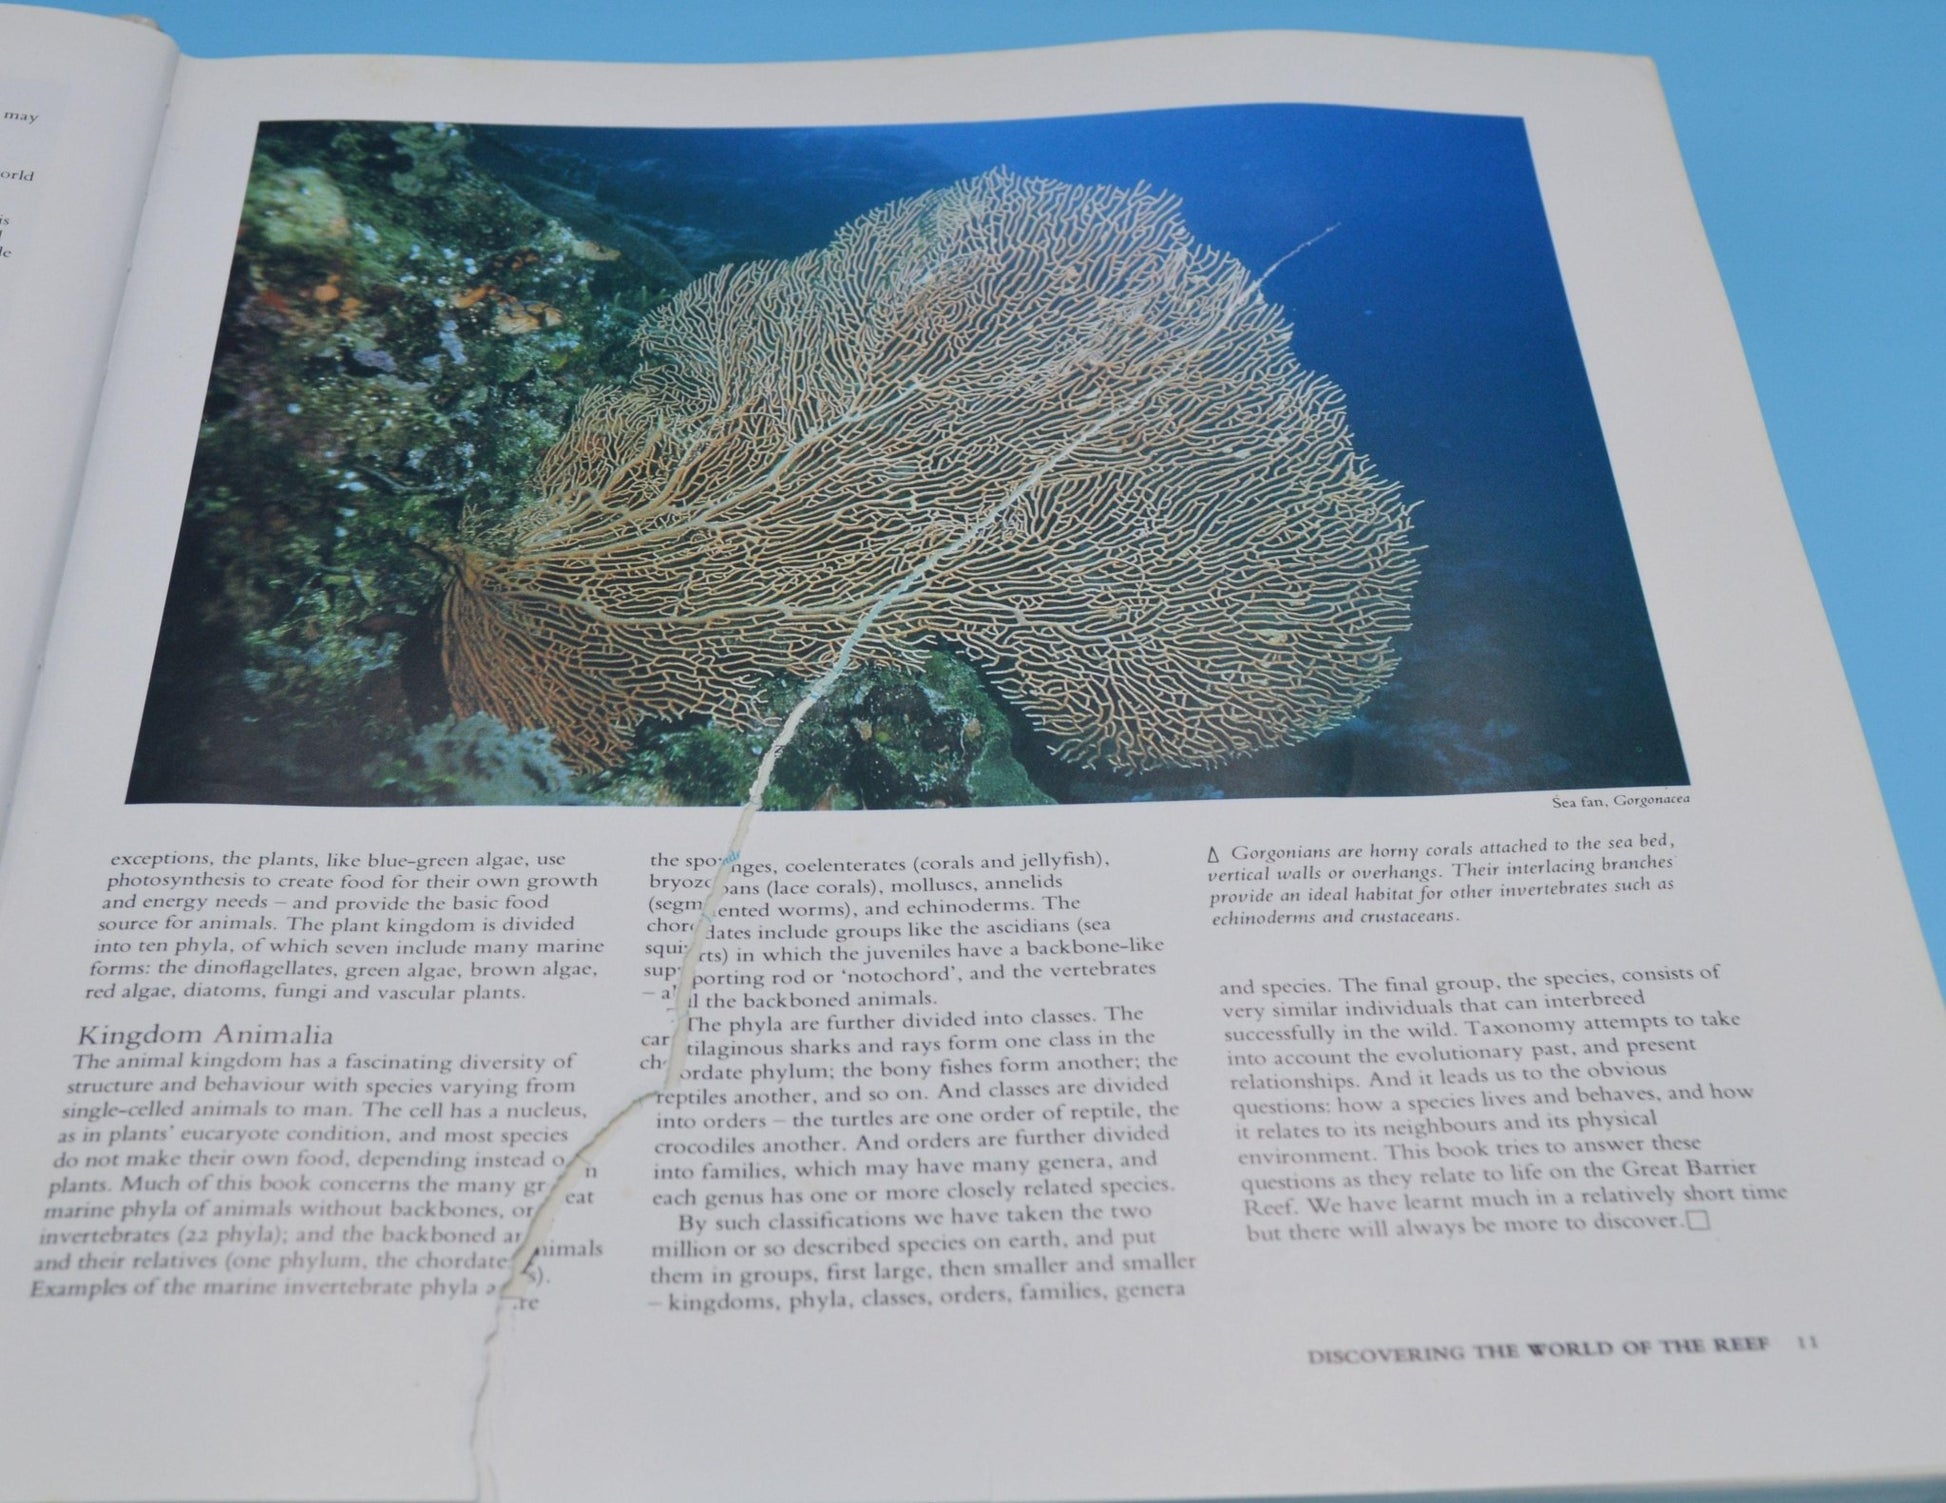 SECONDHAND BOOK READERS DIGEST THE GREAT BARRIER REEF - TMD167207